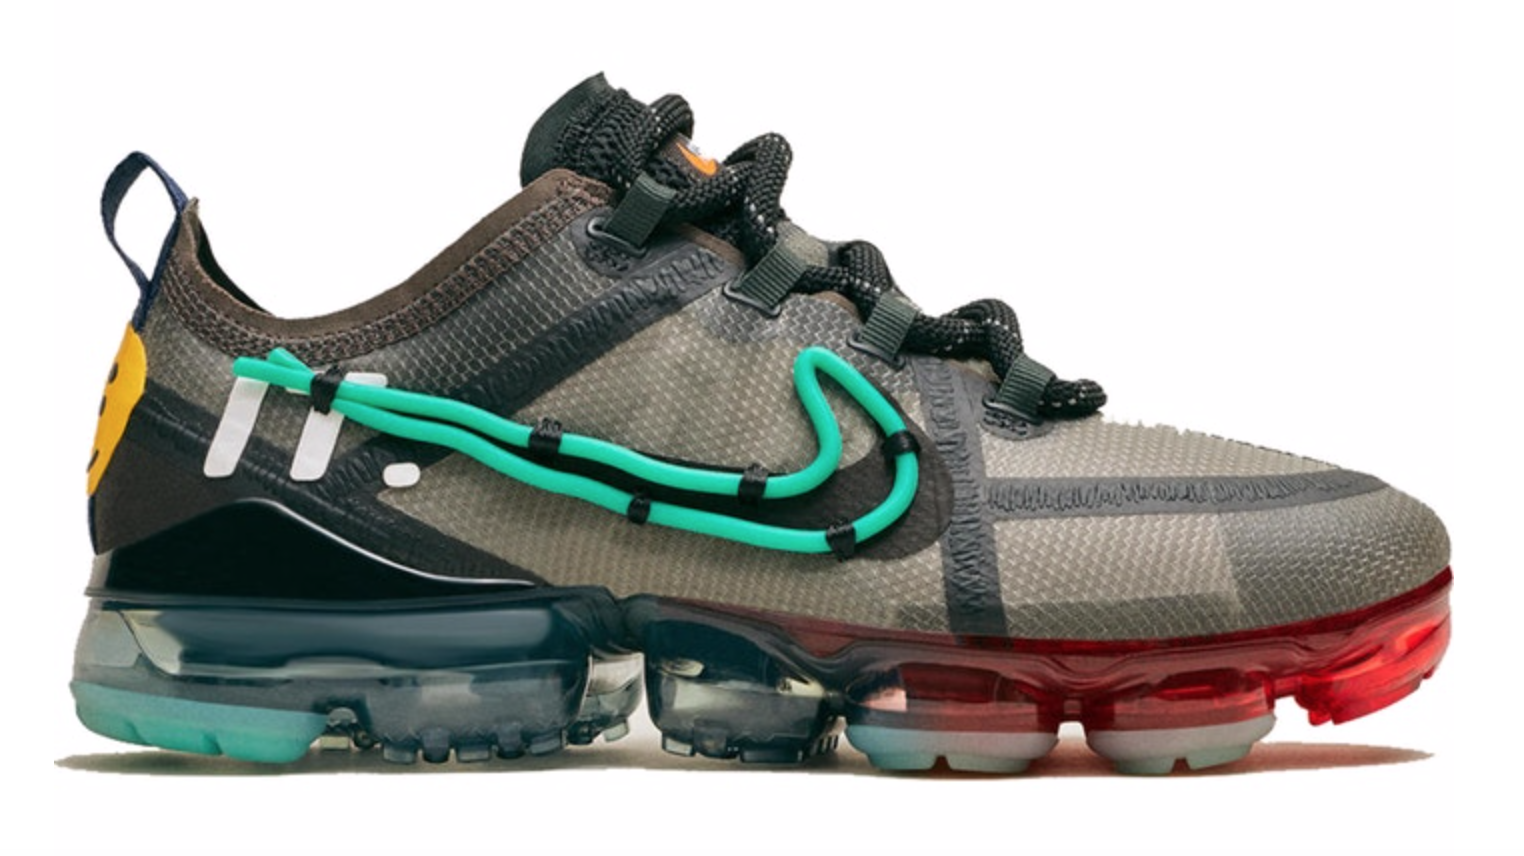 Best Nike Air Max Shoes 2019 | Air Max Releases and Deals